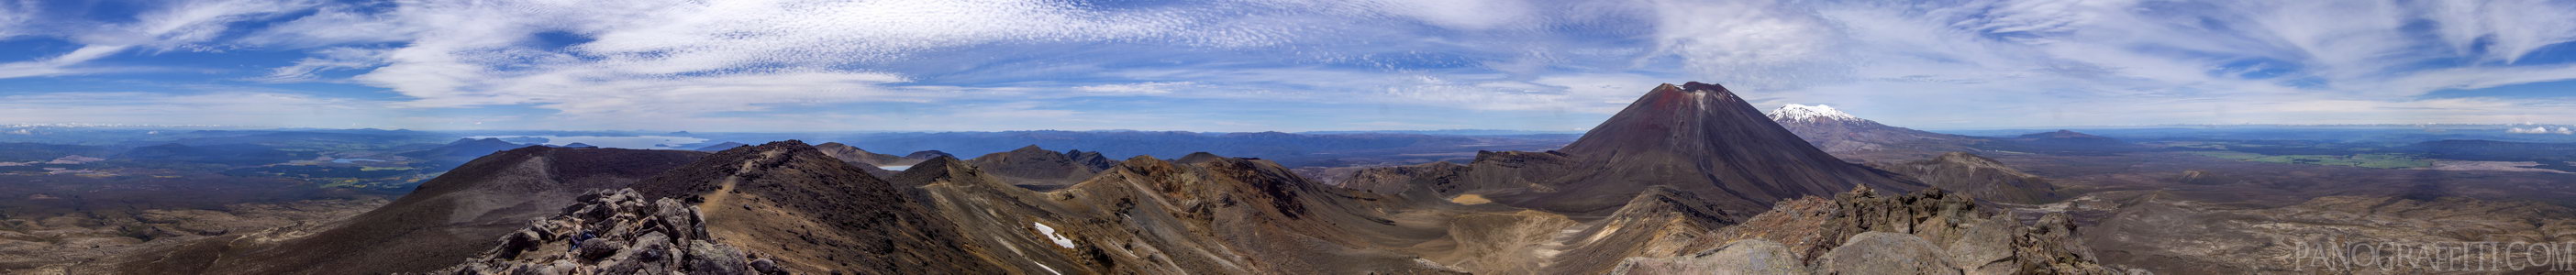 Tongariro Crossing 360 - A 360 degree view of the Tongariro Crossing from the top of Mt Tongariro